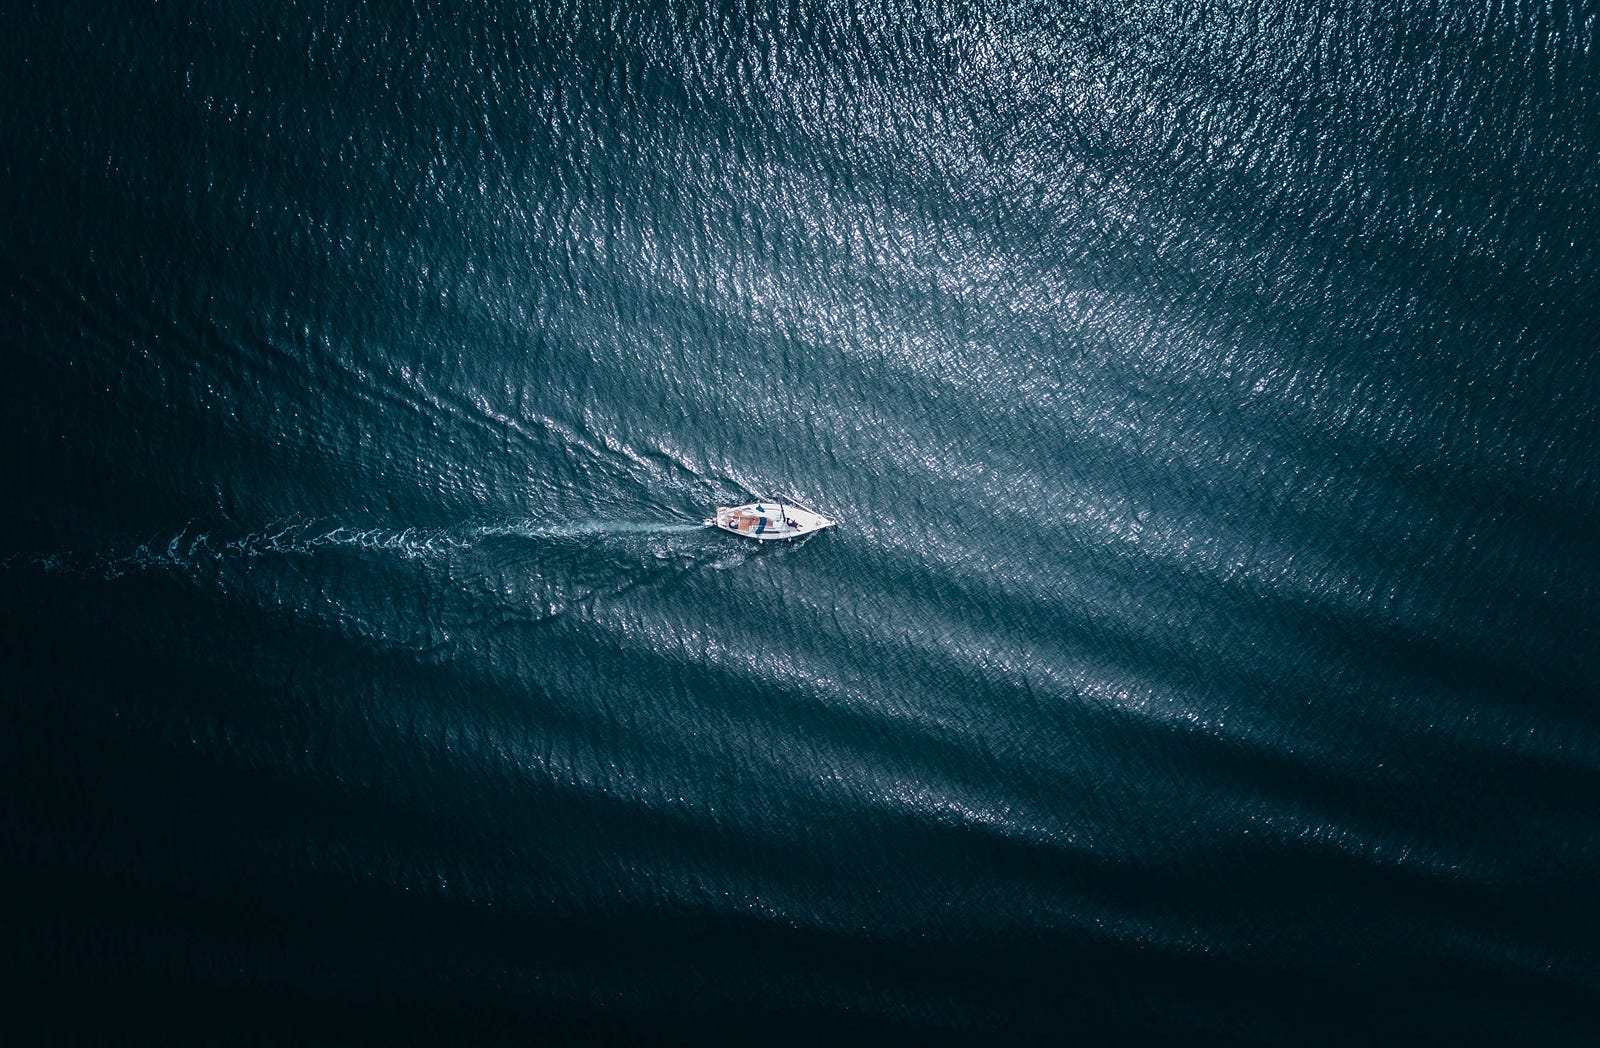 A solo boater is seen from far above in the dark blue sea. When the alternative is not sleeping at all, polyphasic sleep might be helpful. For example, some solo sailors adopt a polyphasic sleep schedule leading into a race to help them manage limited sleep while racing.